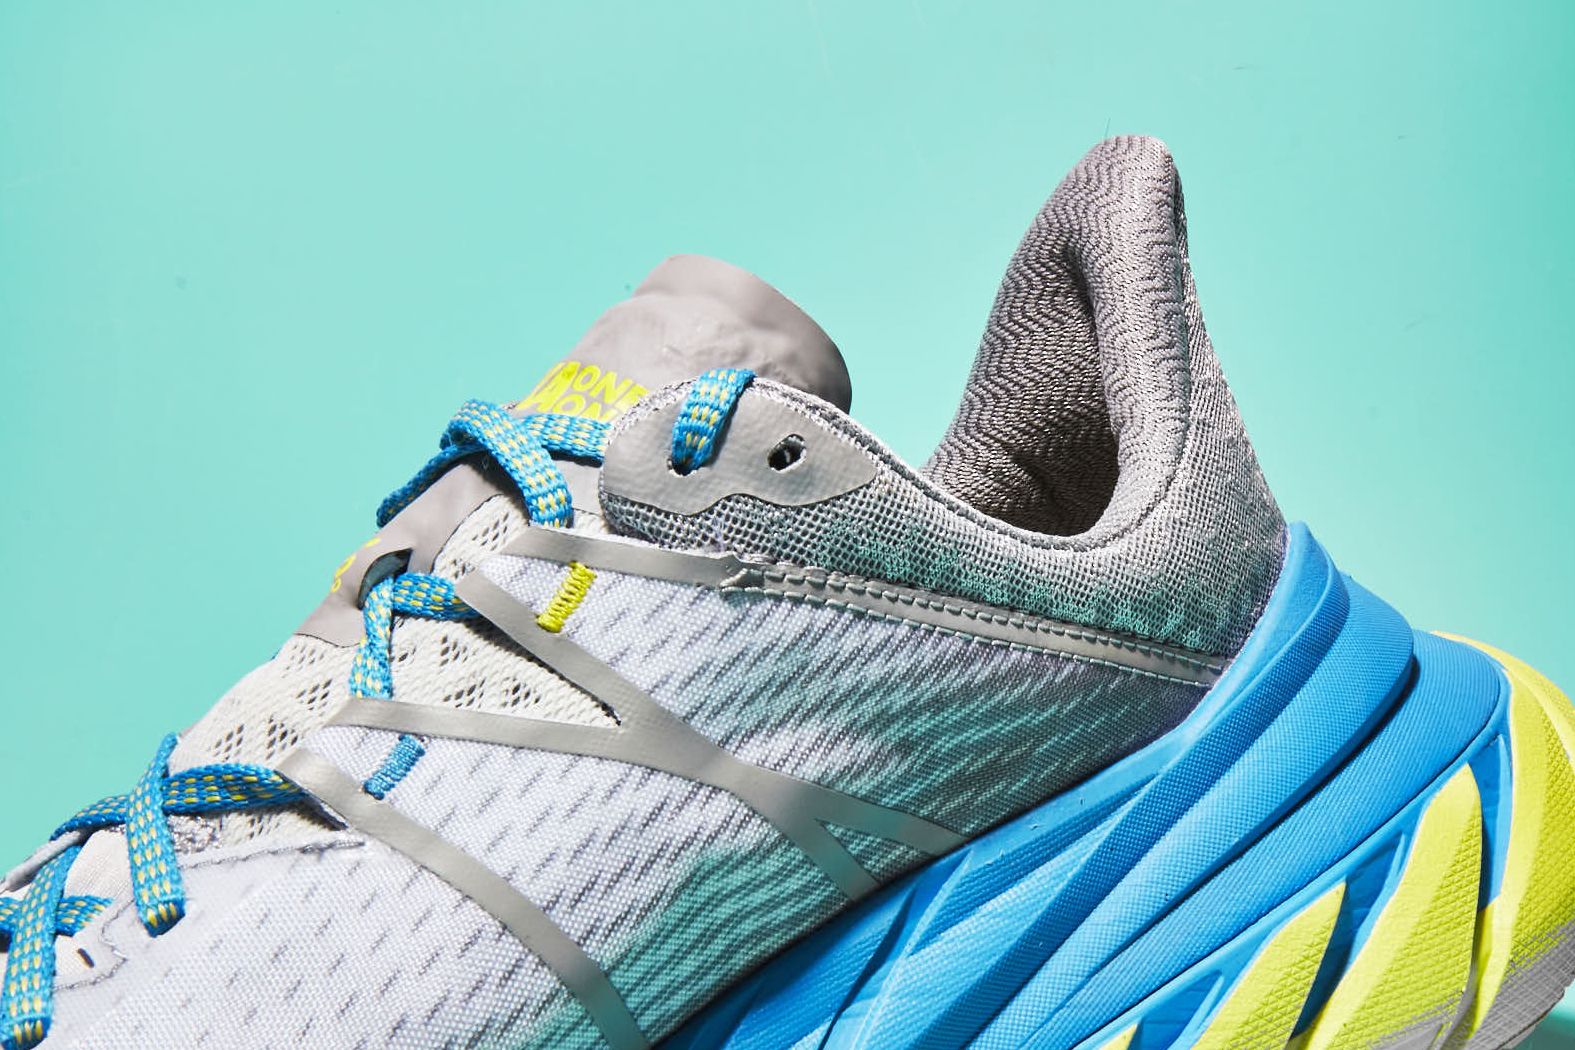 Hoka Clifton 9 Performance Review: The Best Clifton Ever - WearTesters